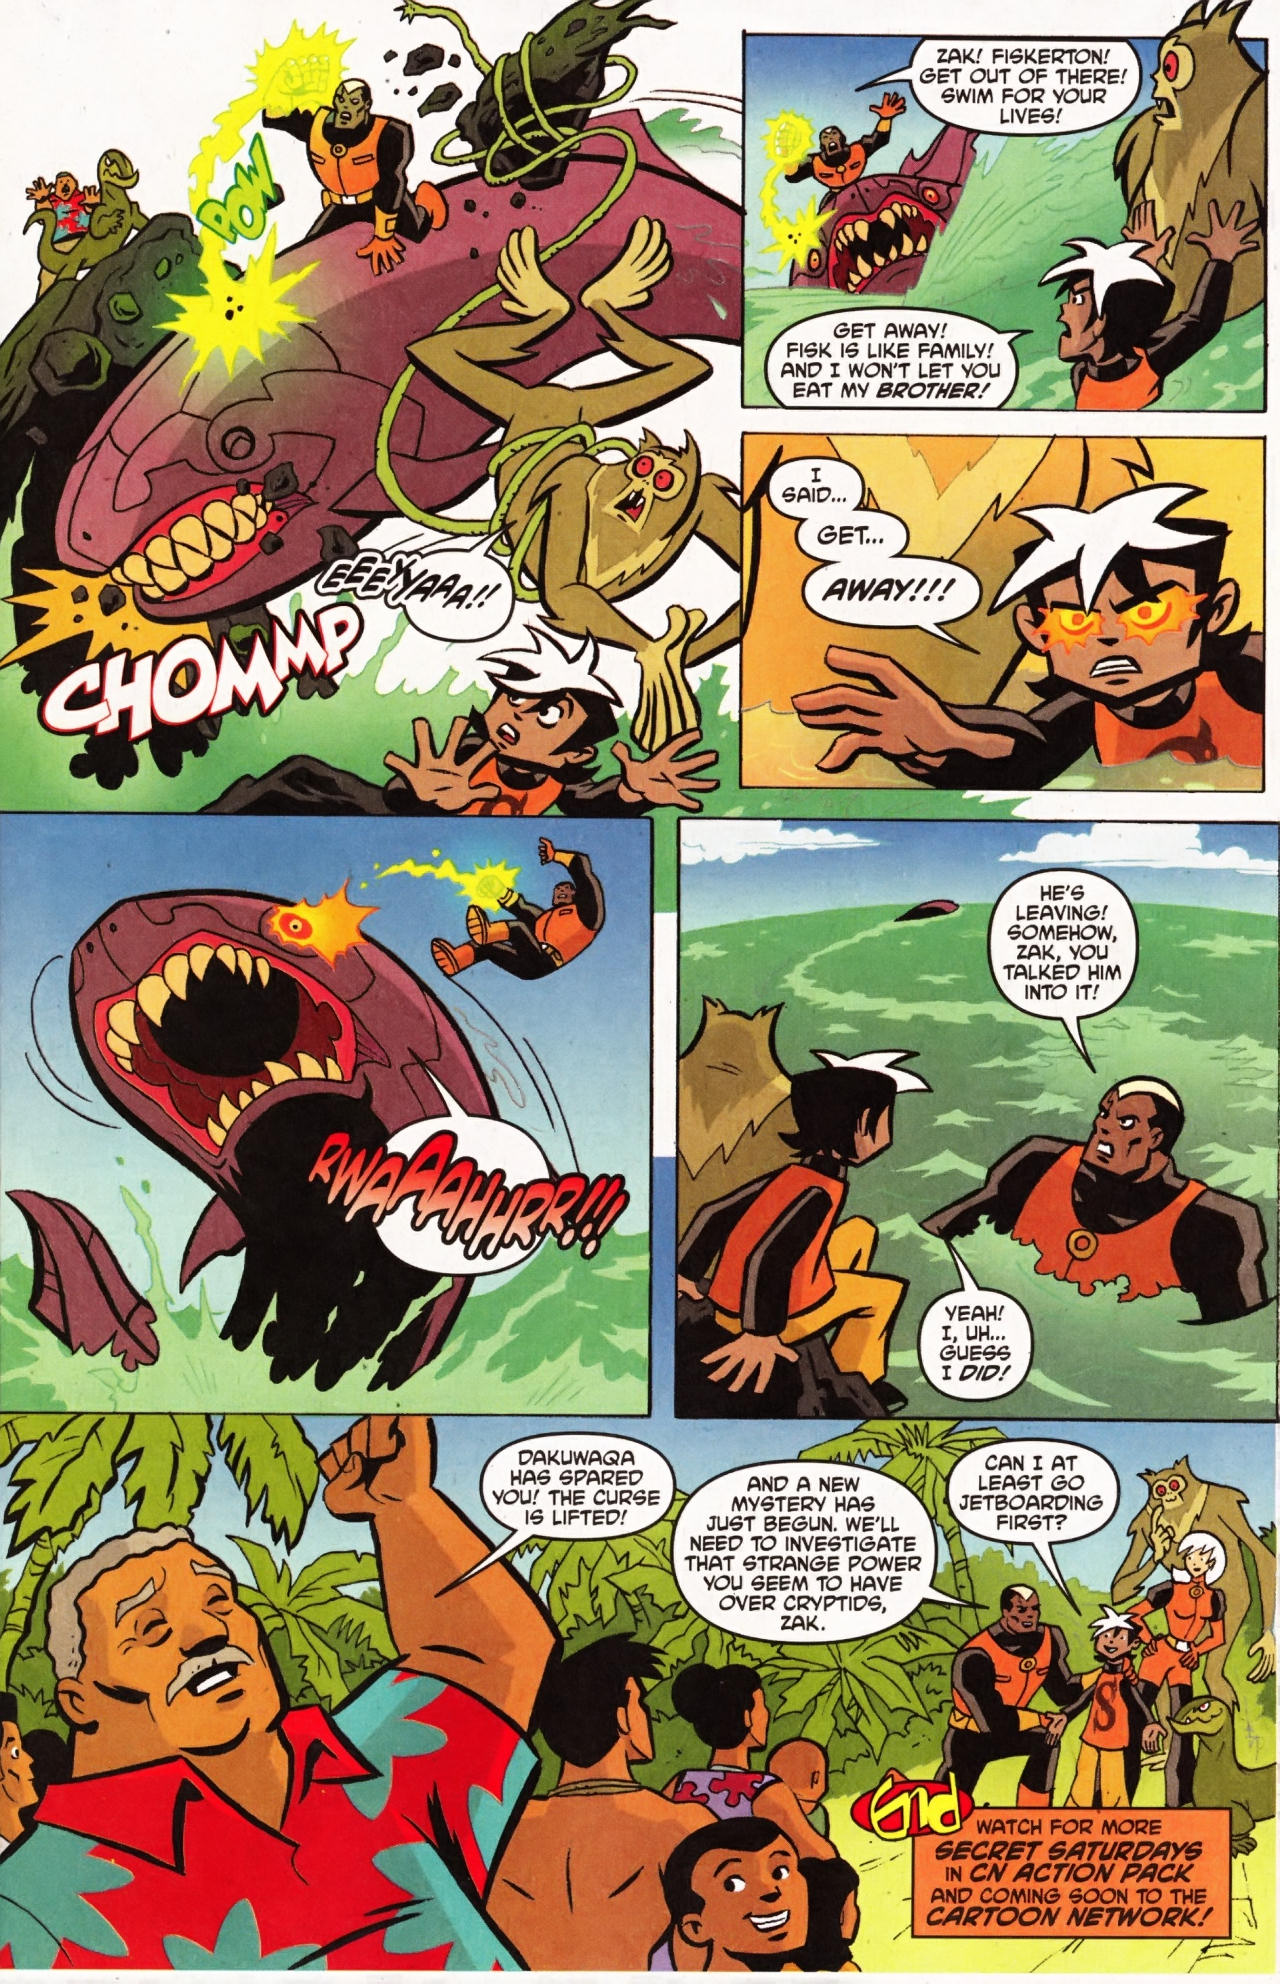 Read online Cartoon Network Action Pack comic -  Issue #26 - 13